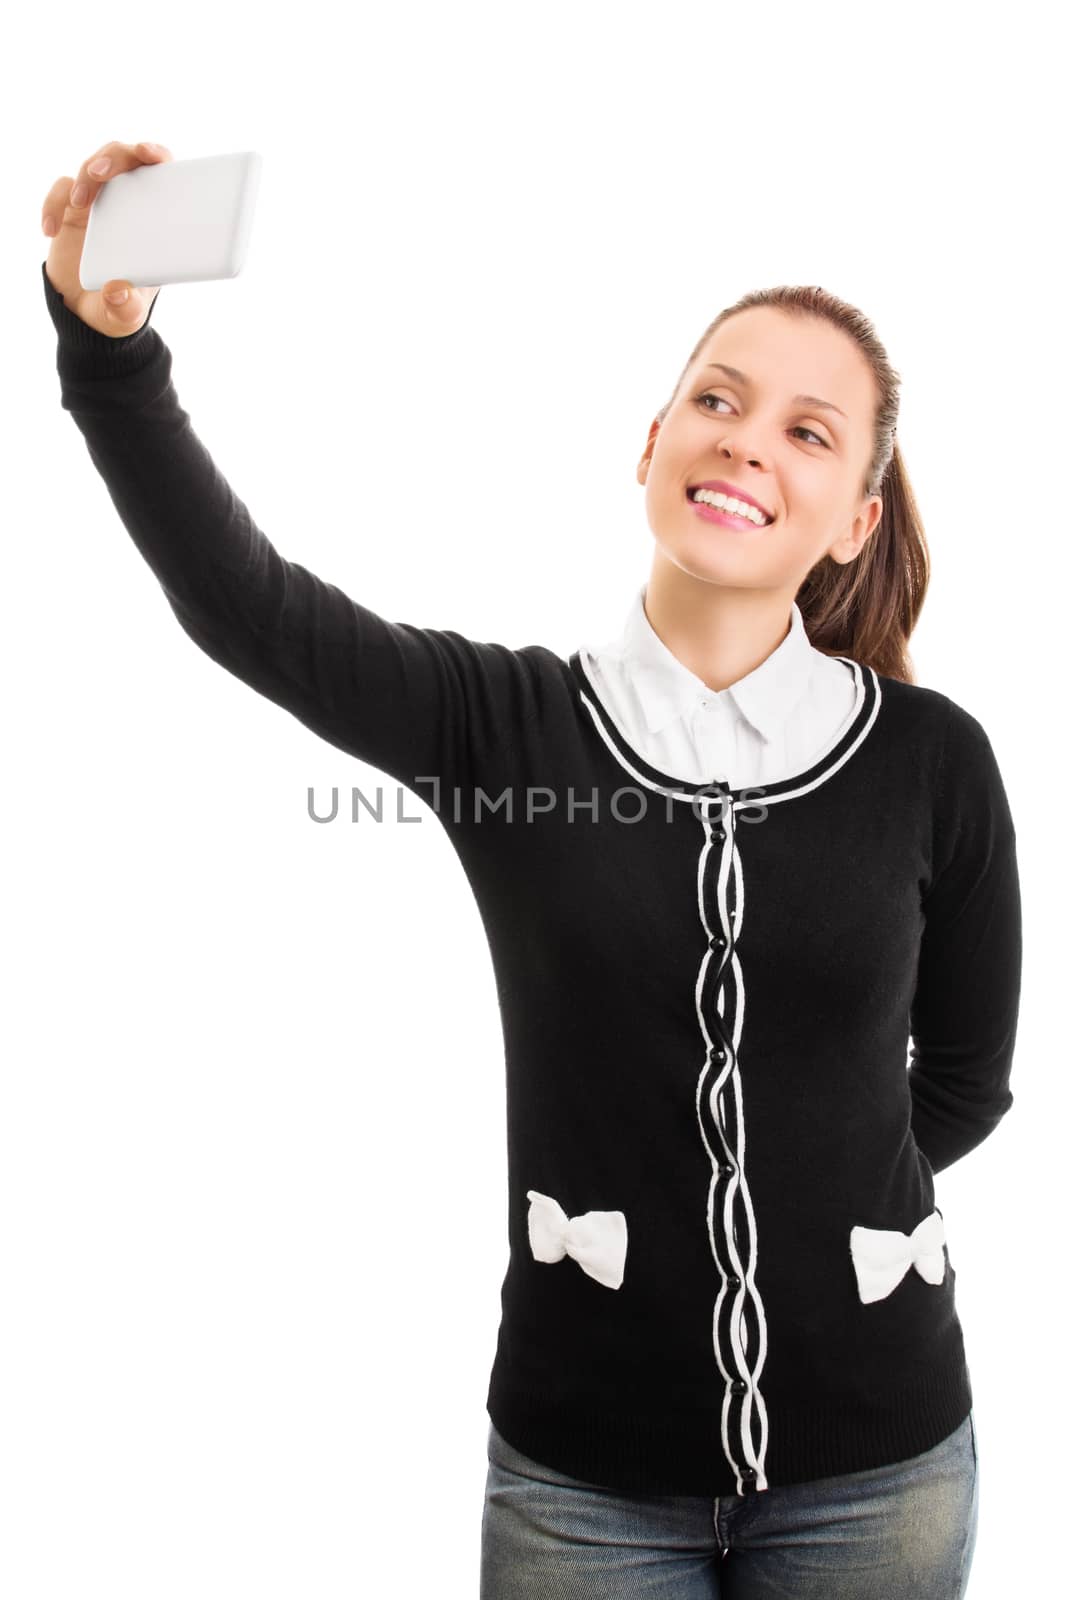 Young girl wearing school uniform and making a selfie, isolated on a white background.